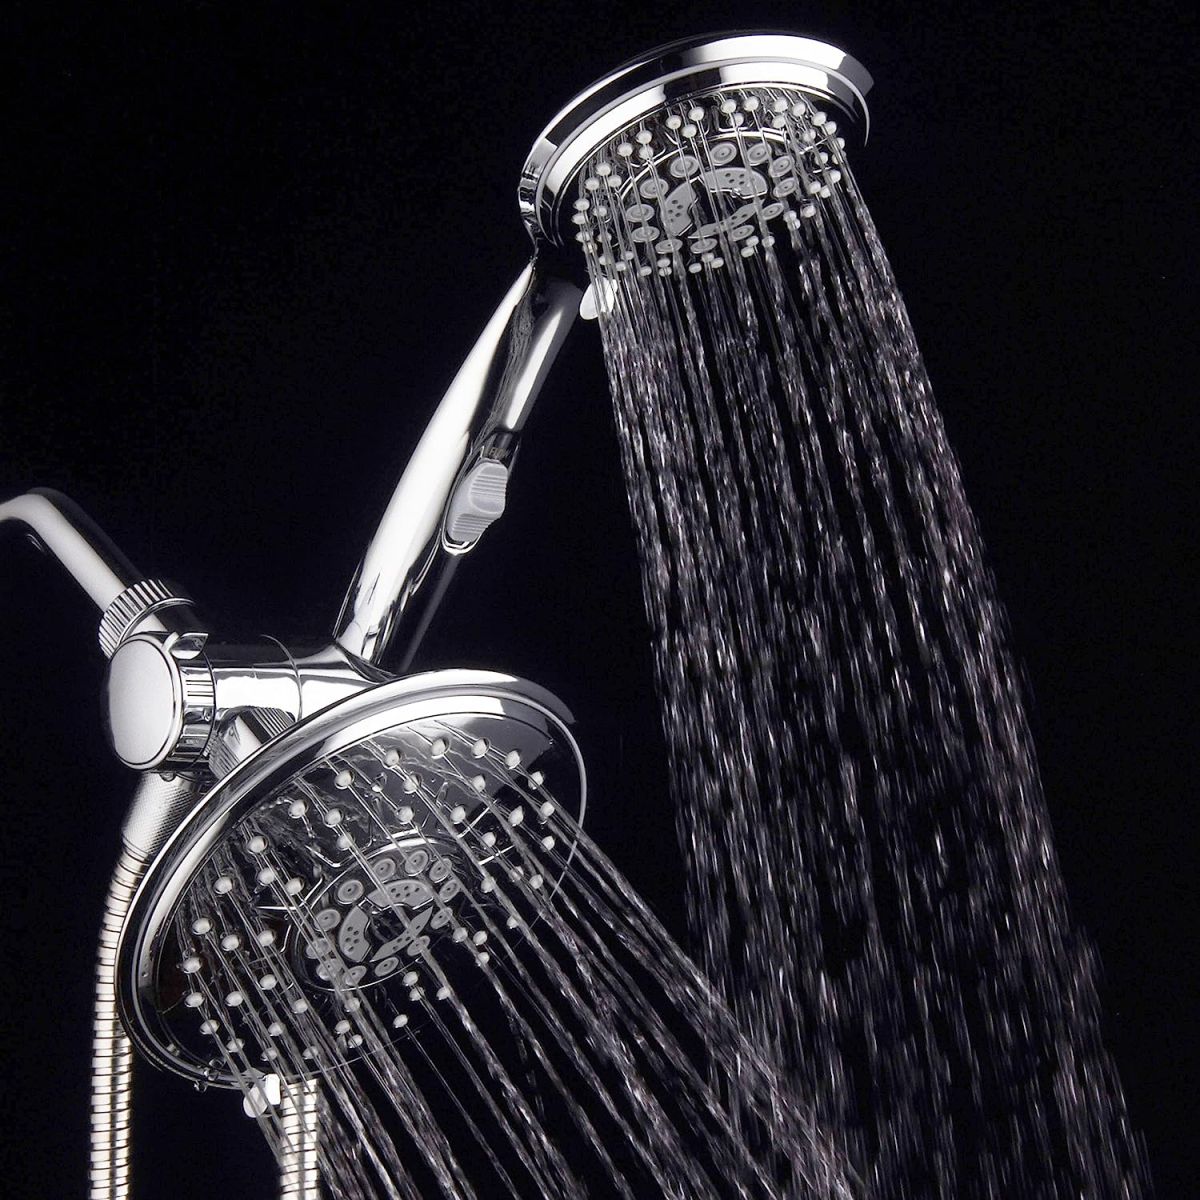 Hydroluxe 30-Setting Ultra-Luxury 6 inch Rainfall Shower Head & Handheld 3-way Combo with Water Saving Pause Switch and Stainless Steel Hose/Enjoy Separately or Together! Premium All Chrome Finish